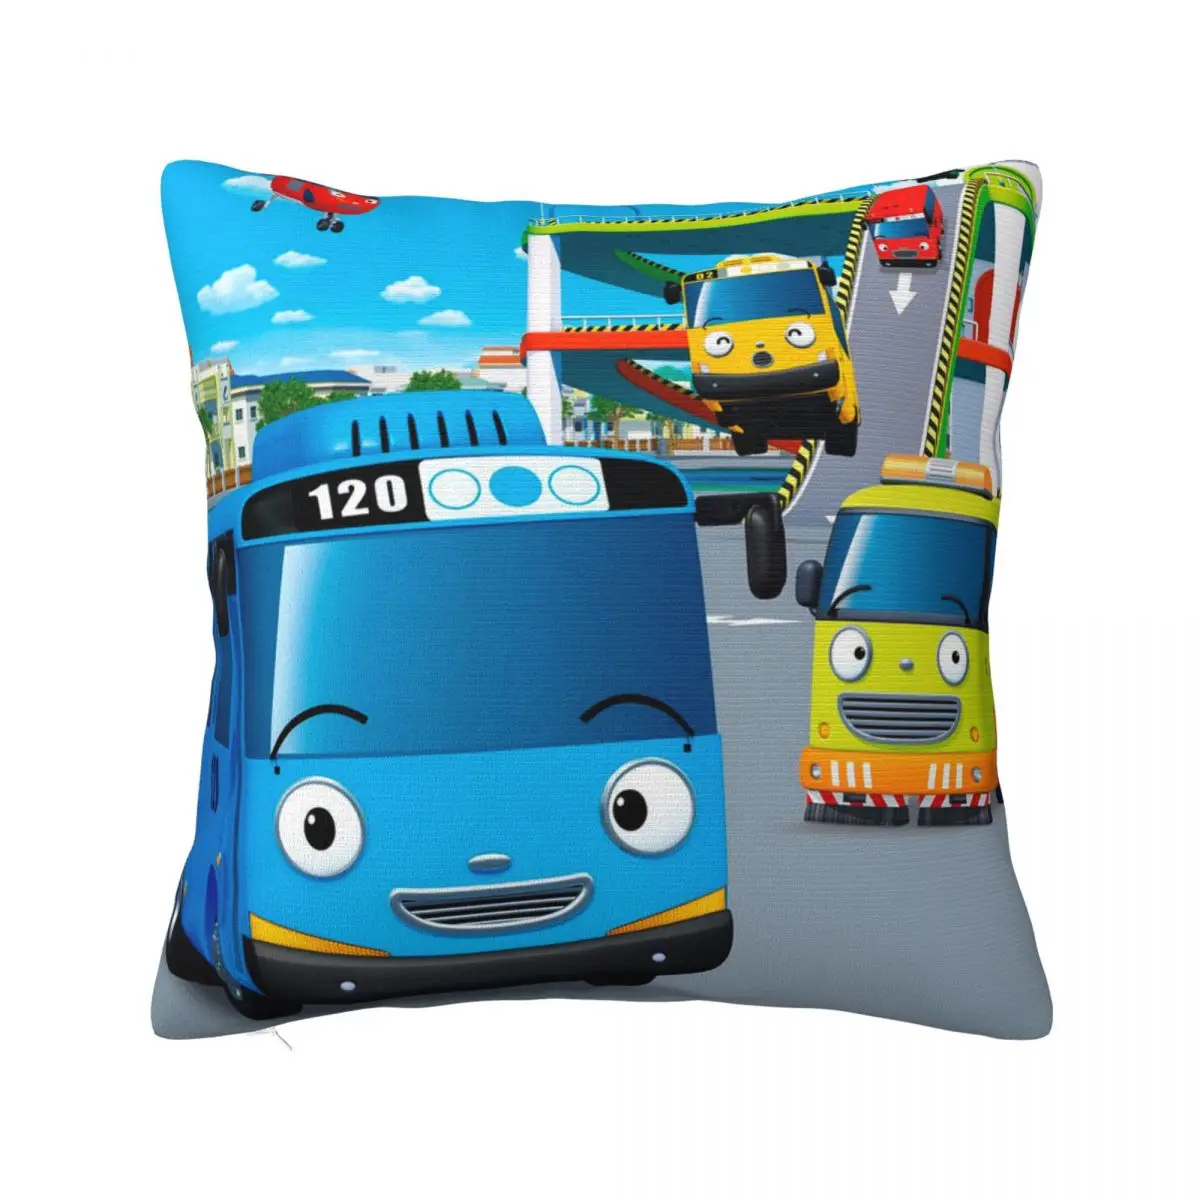 

Tayo The Little Bus Anime Pillowcase Print Polyester Cushion Cover cartoon cute kids Novelty Pillow Case Cover Home Square 40cm